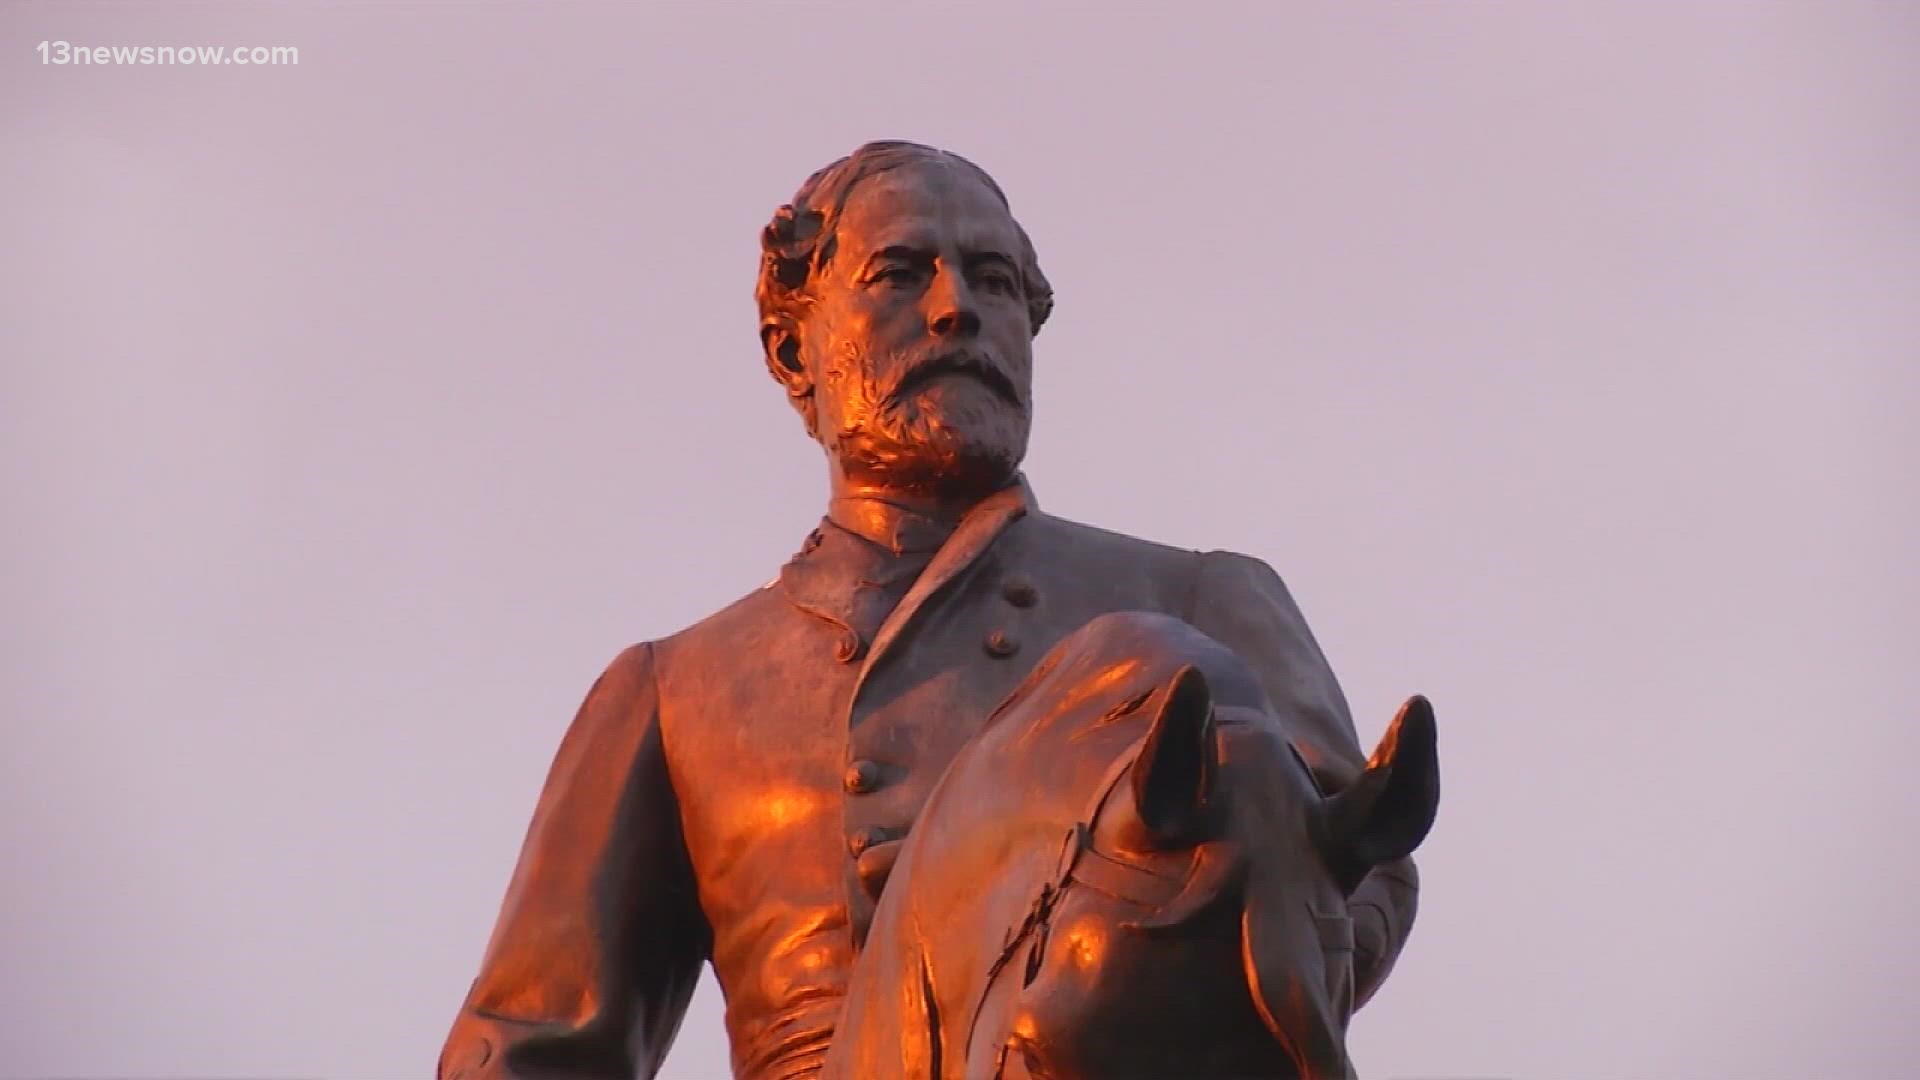 The Supreme Court ruled Thursday to remove the Robert E. Lee statue in Richmond.